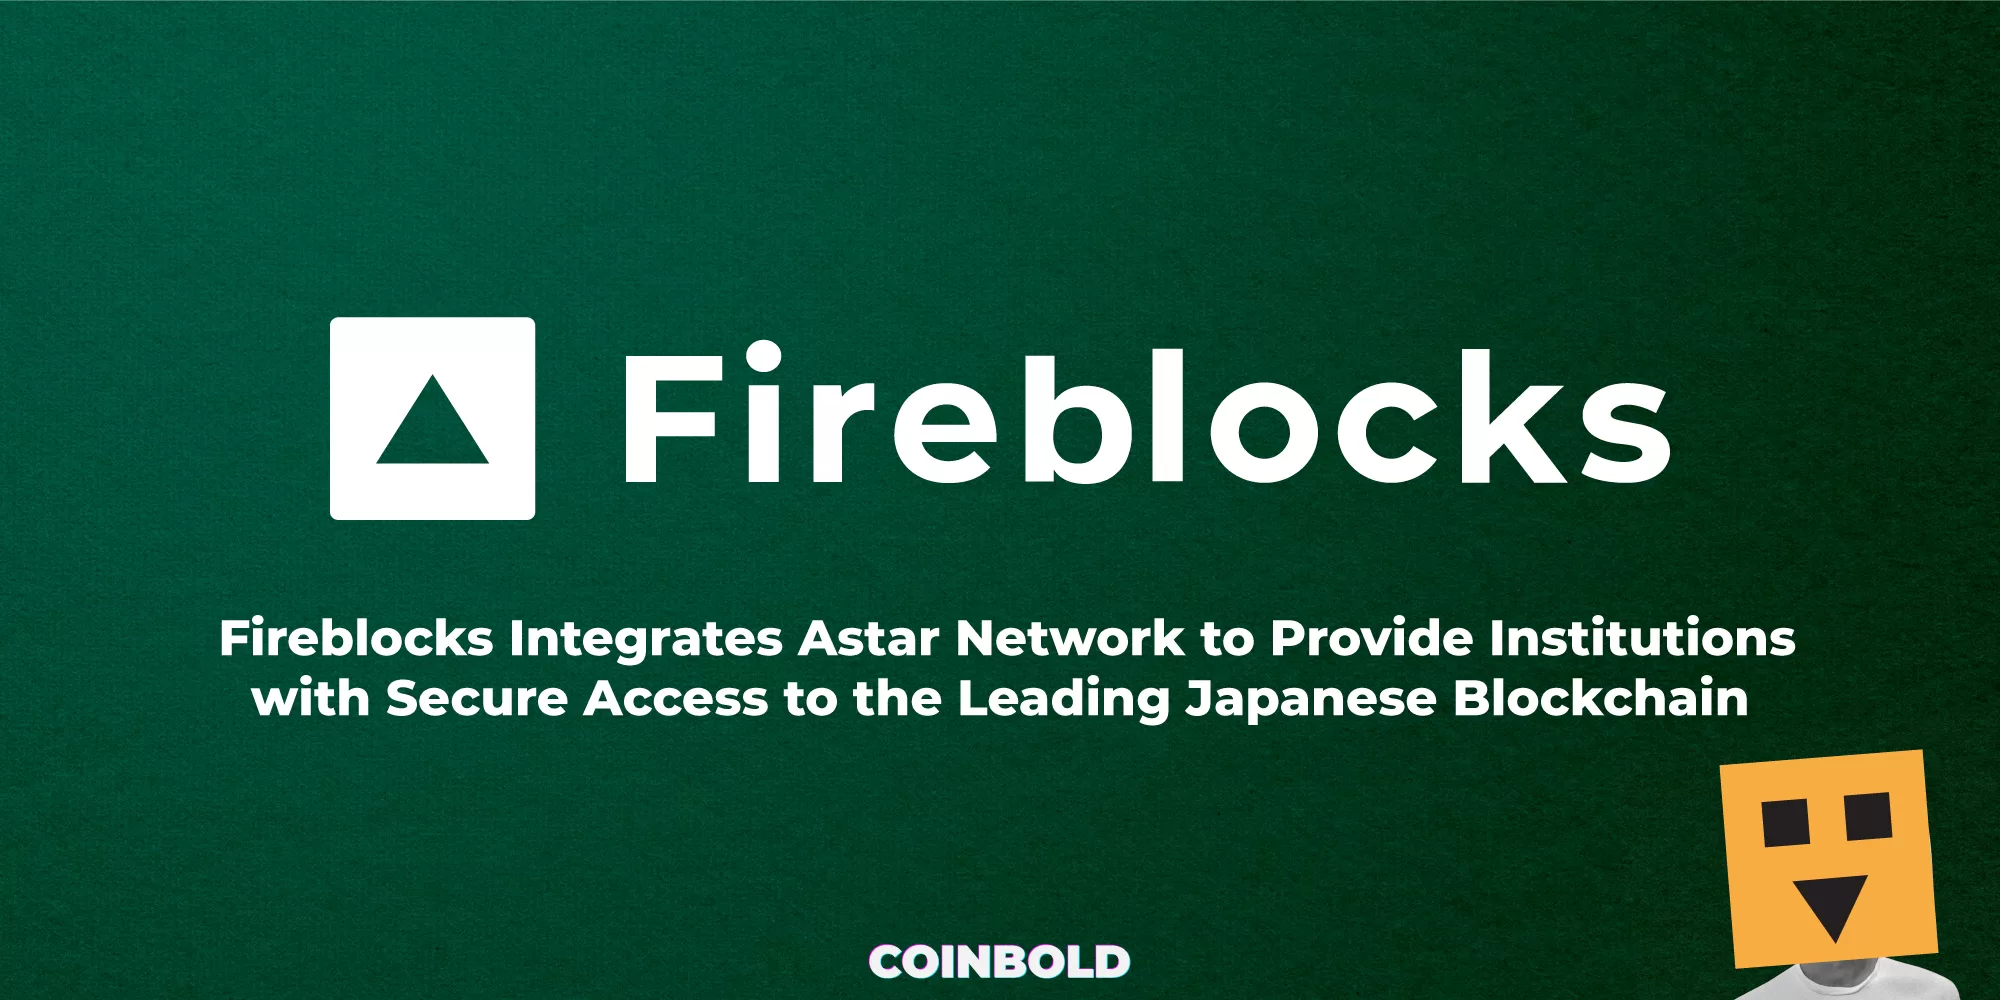 Fireblocks Integrates Astar Network to Provide Institutions with Secure Access to the Leading Japanese Blockchain